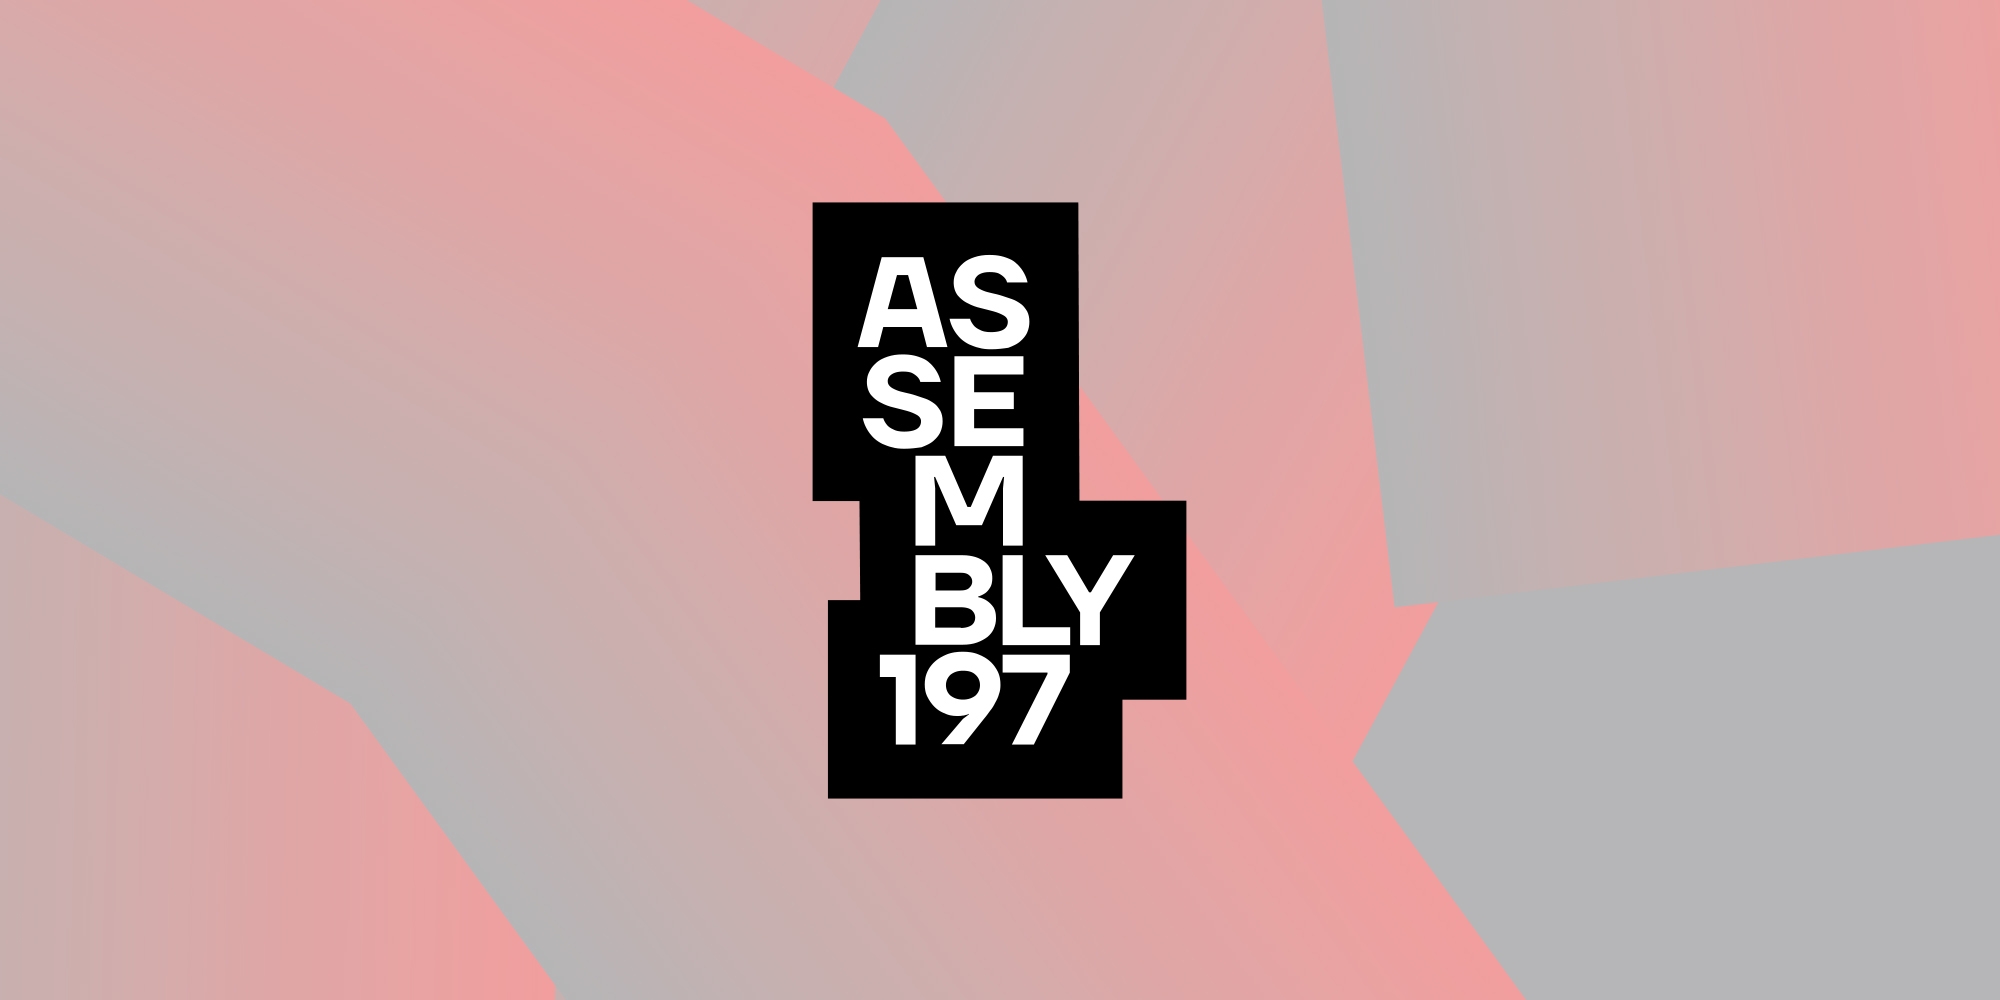 Assembly197, TasDance, Situate and Artery branding